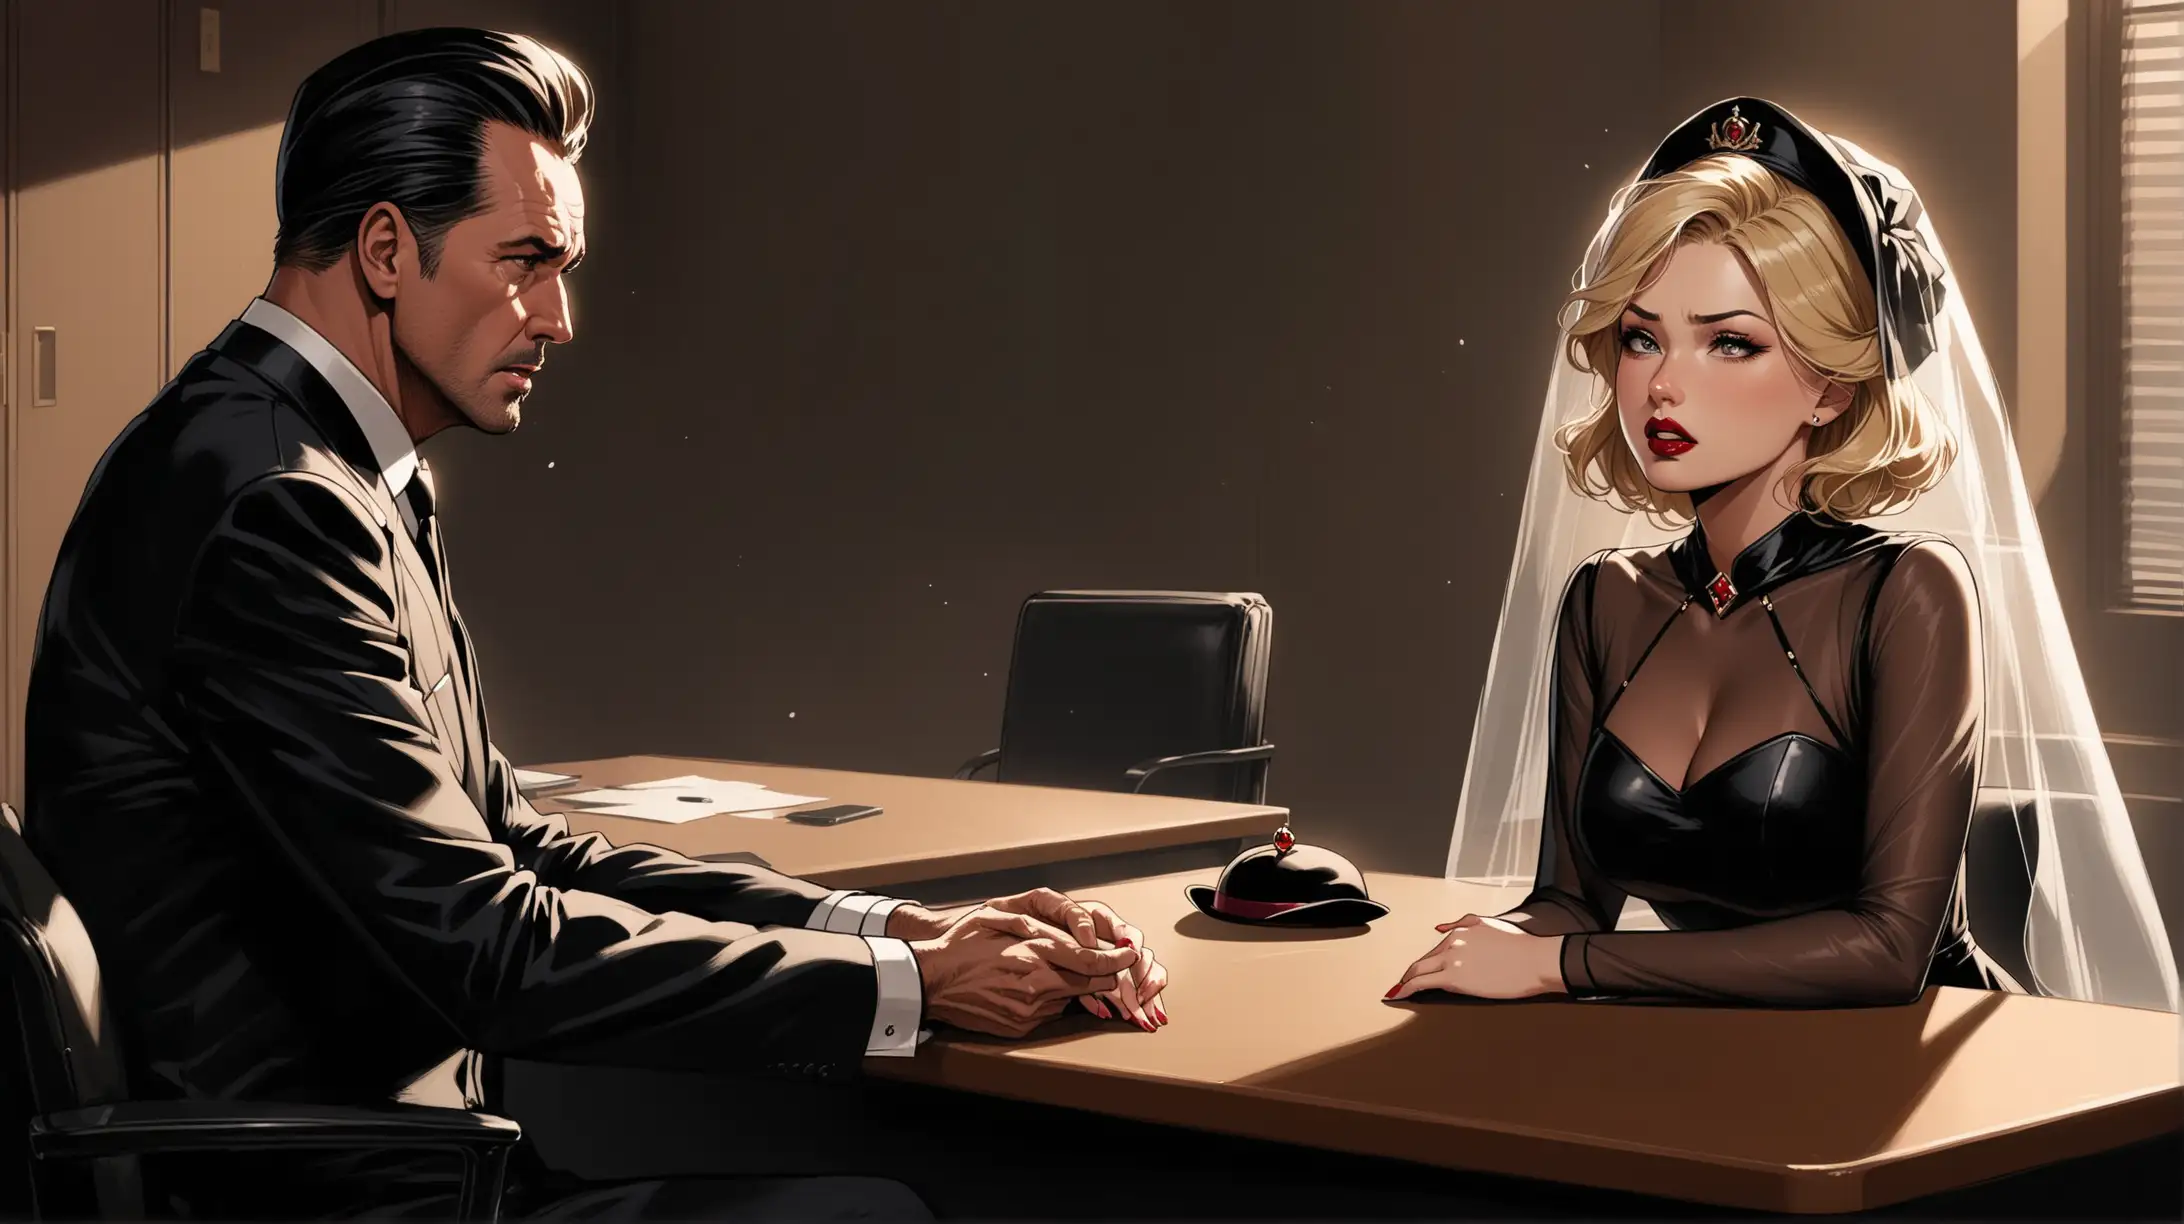 Intense Confrontation Beautiful Blonde Woman in Distress Confronts Man in Black Suit